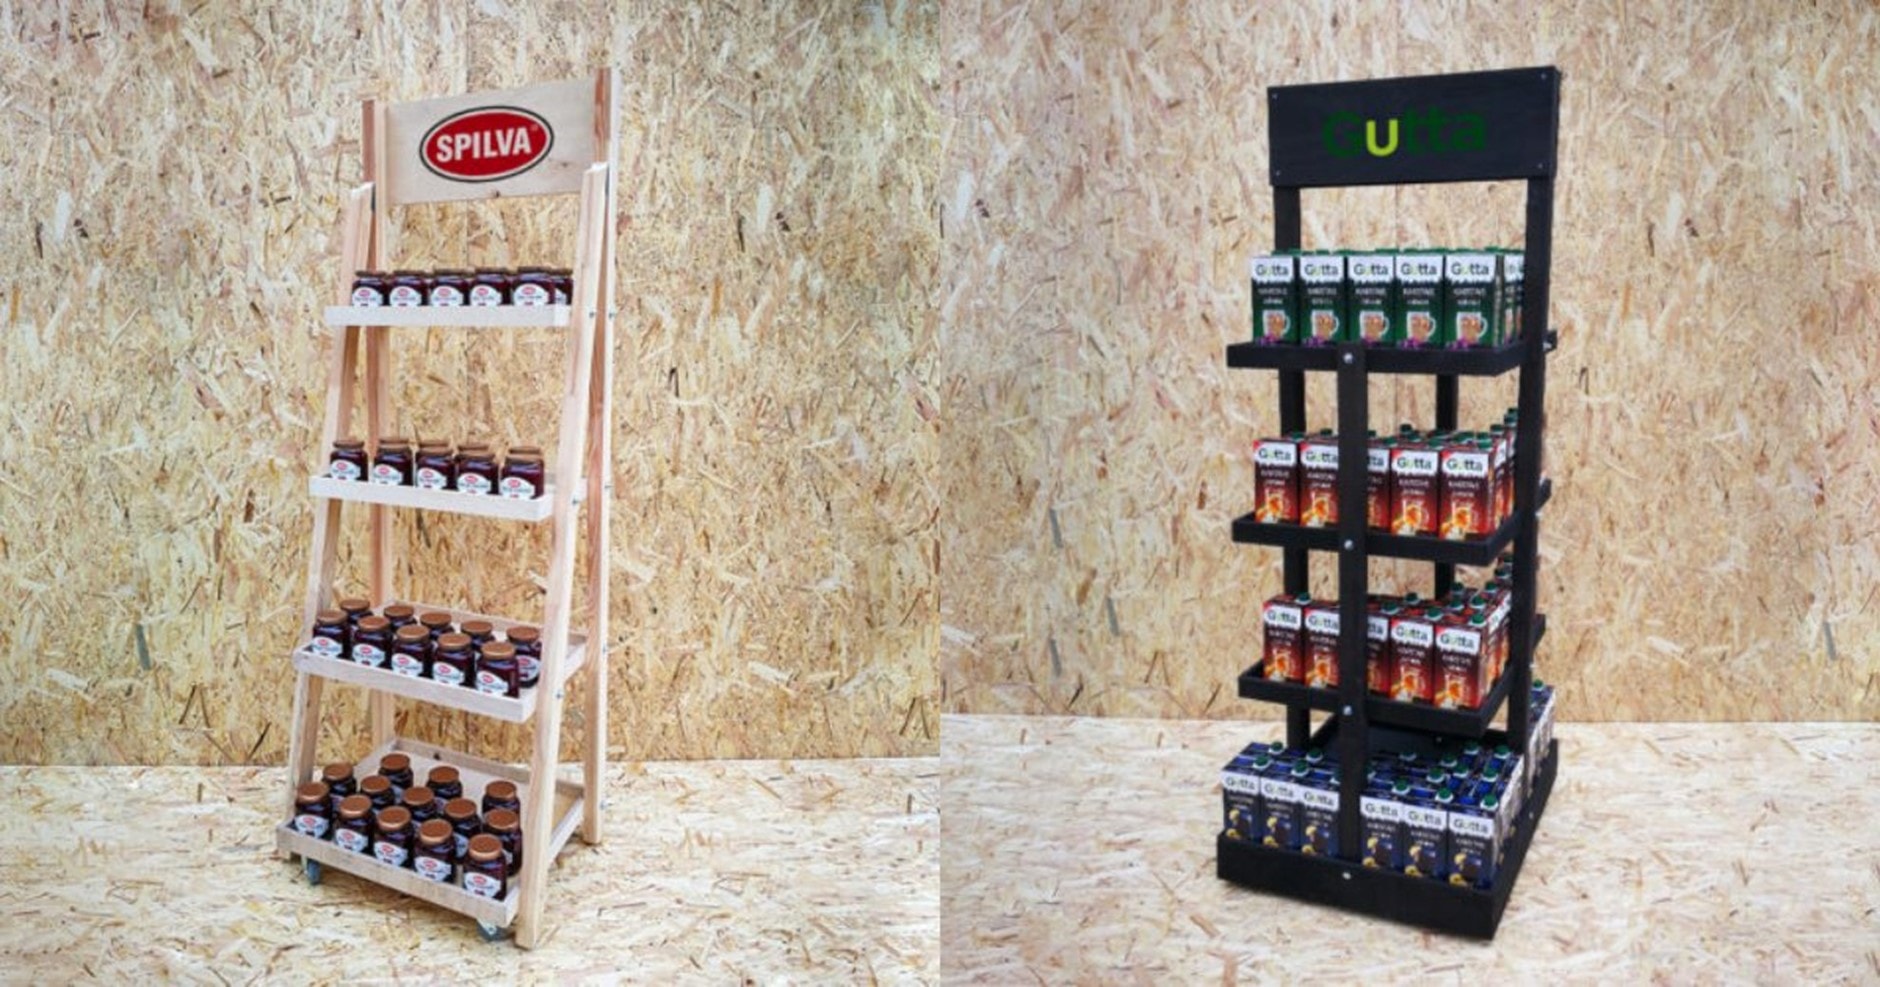  product display stands affect brand awareness